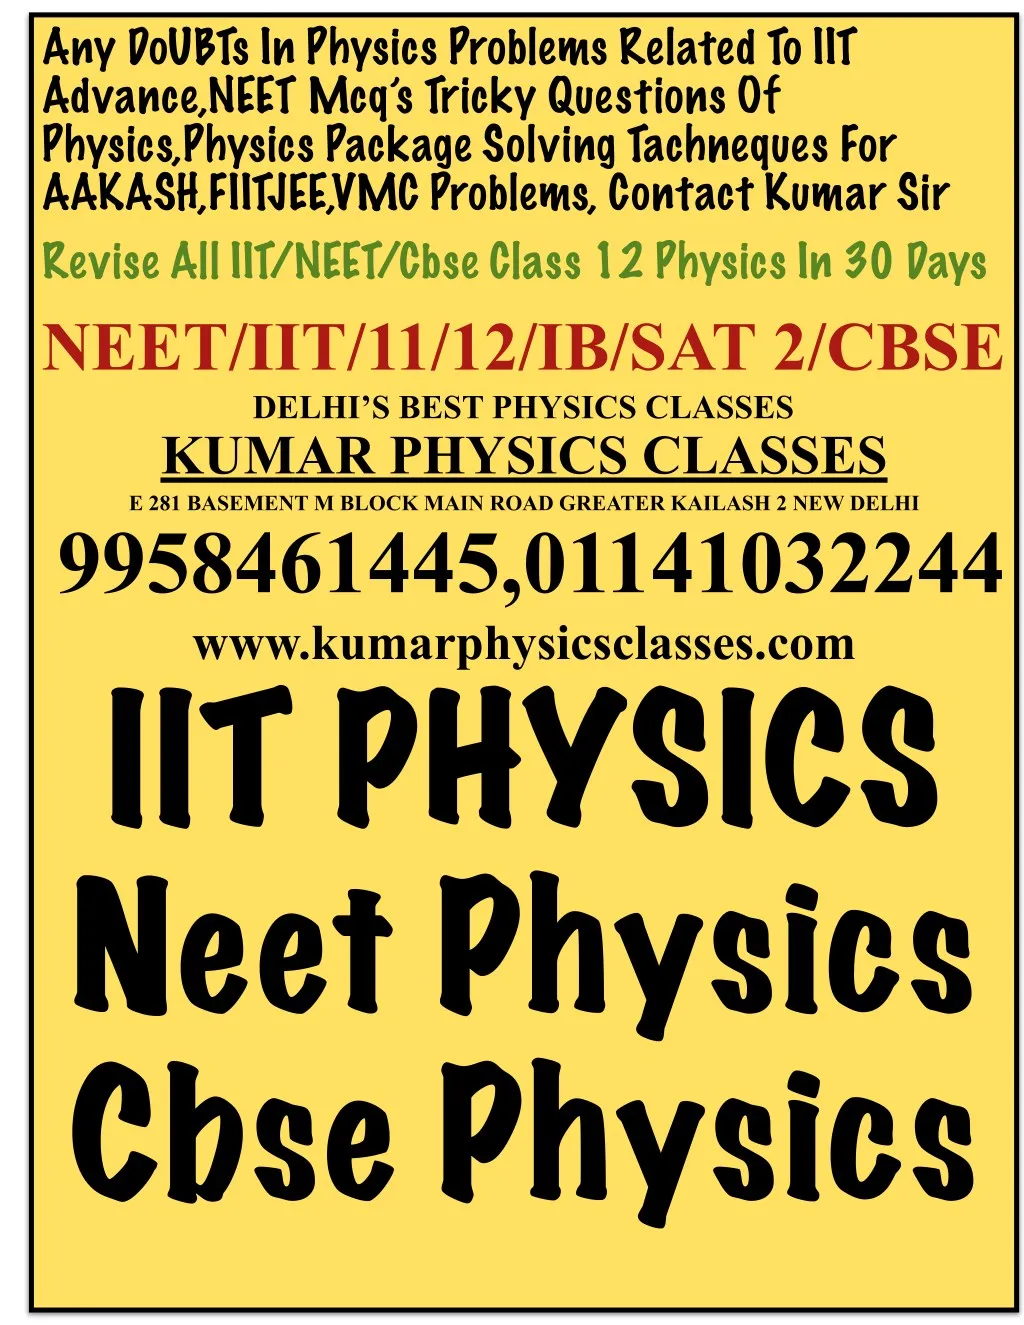 any doubts in physics problems related to iit